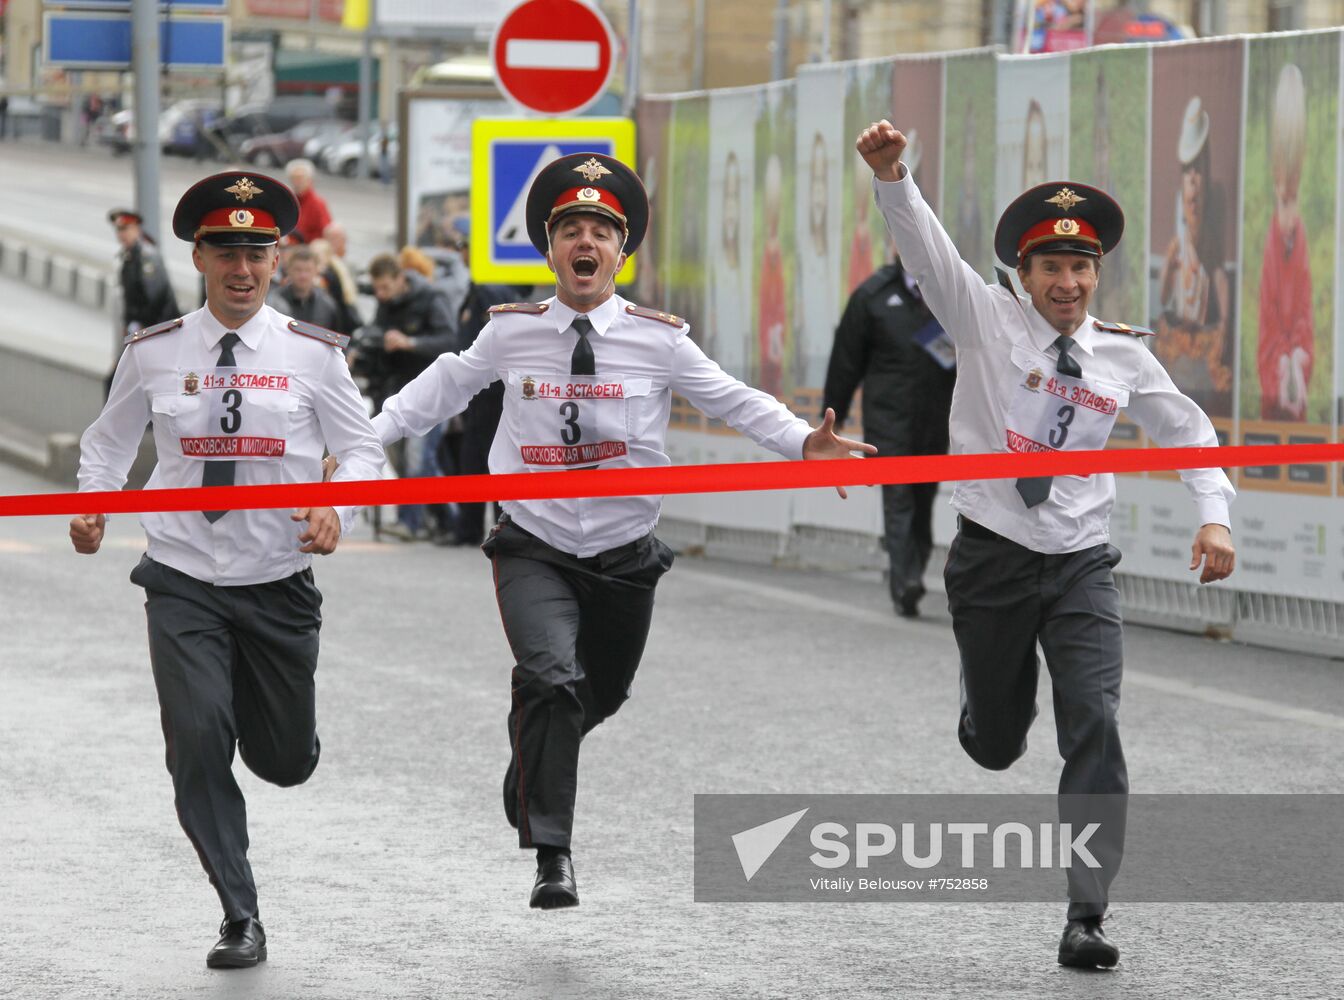 Participants of 41st Police Combined Relay Race